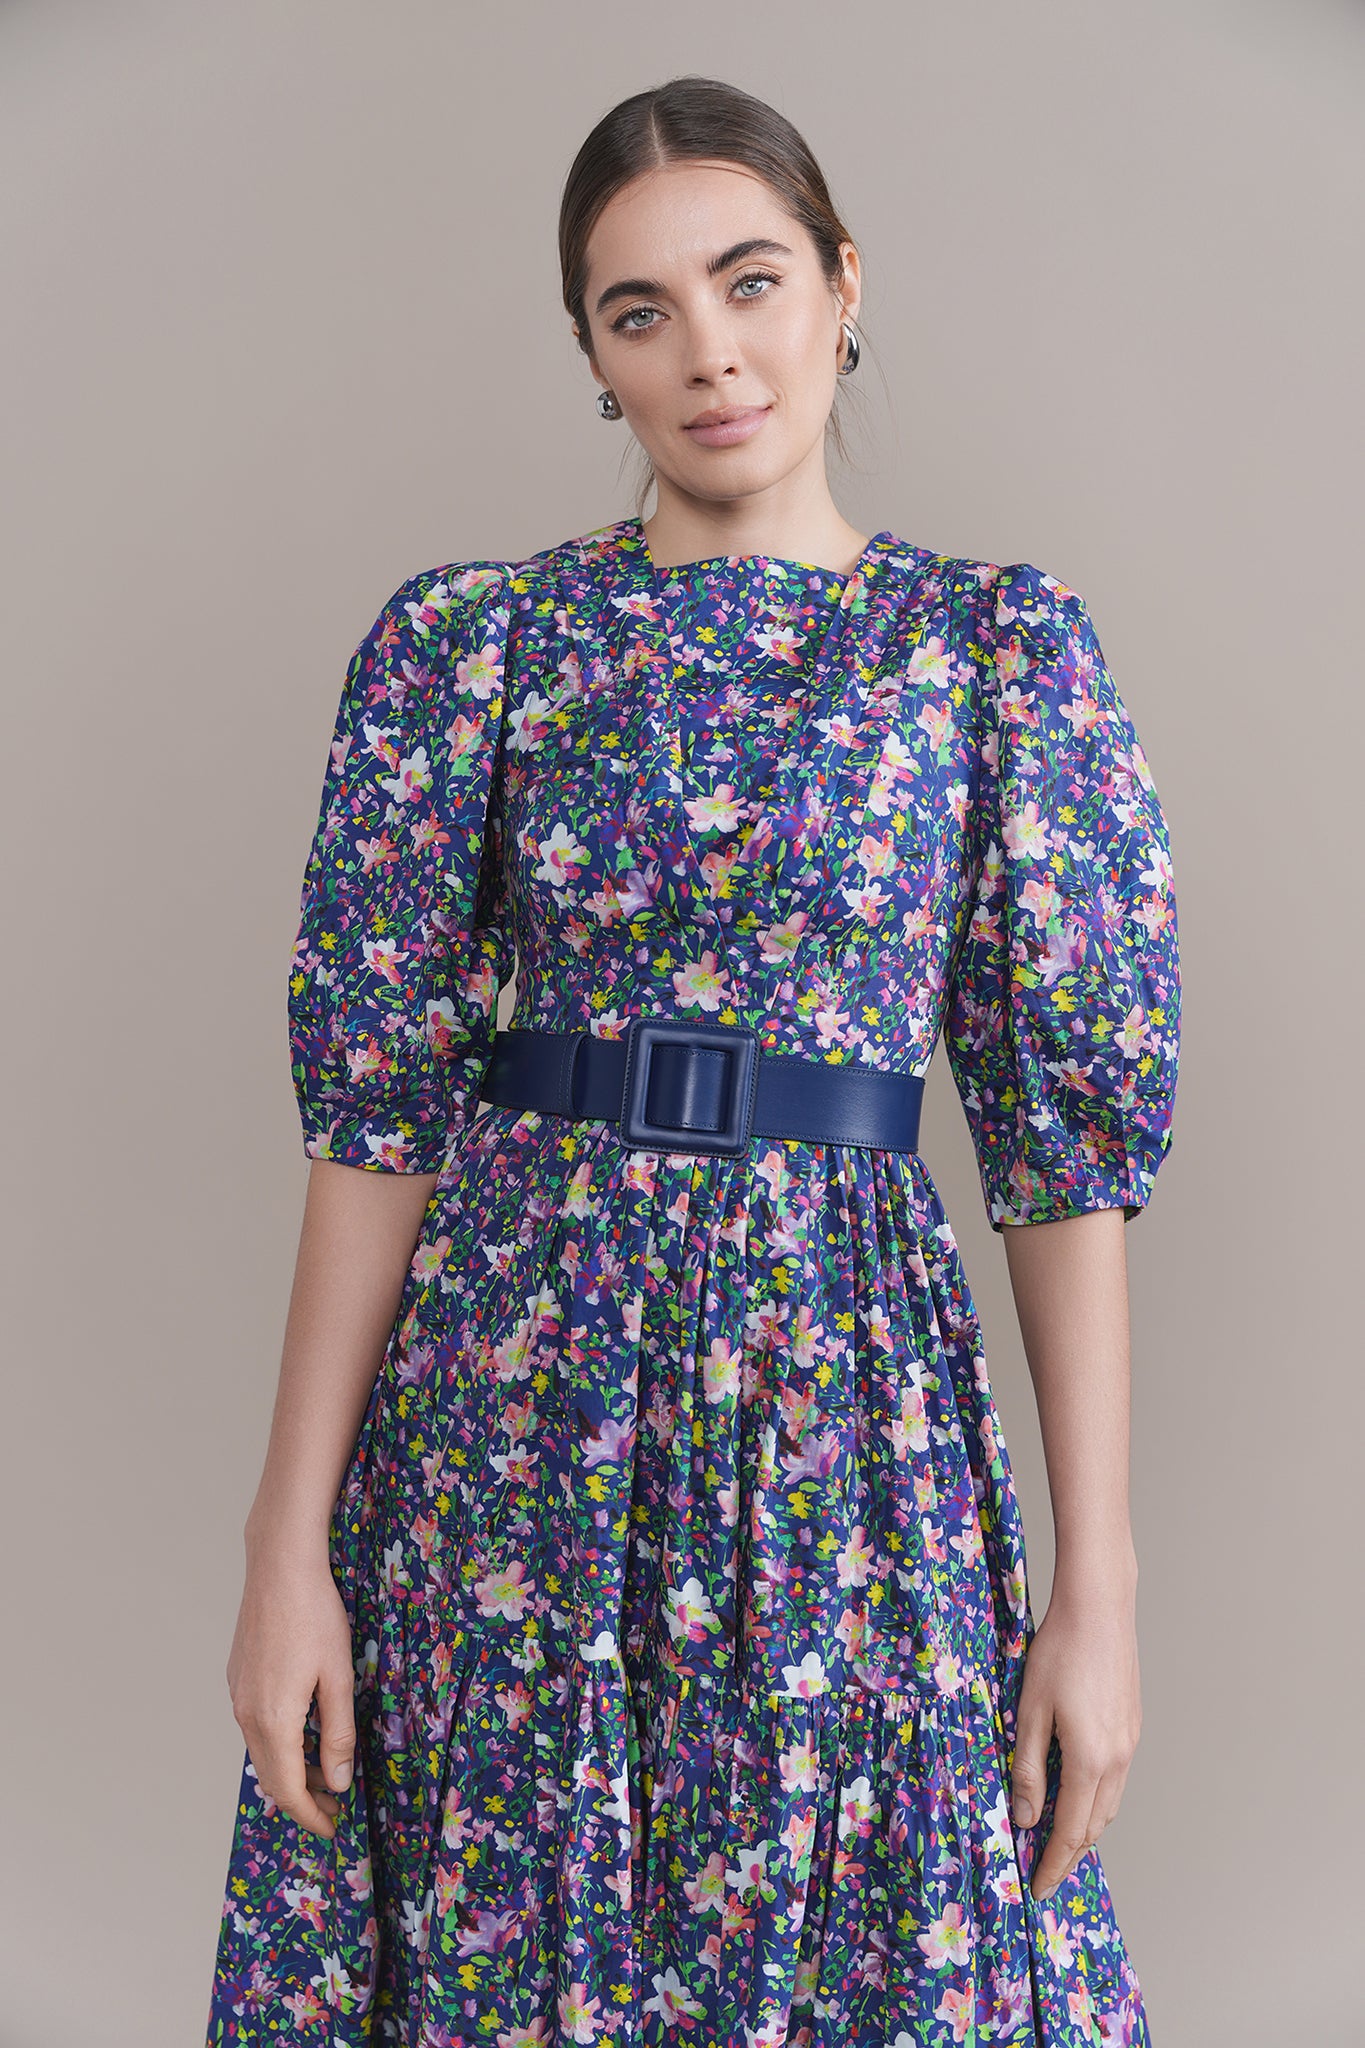 Ellie Convertible Dress in Blue Mix Floral